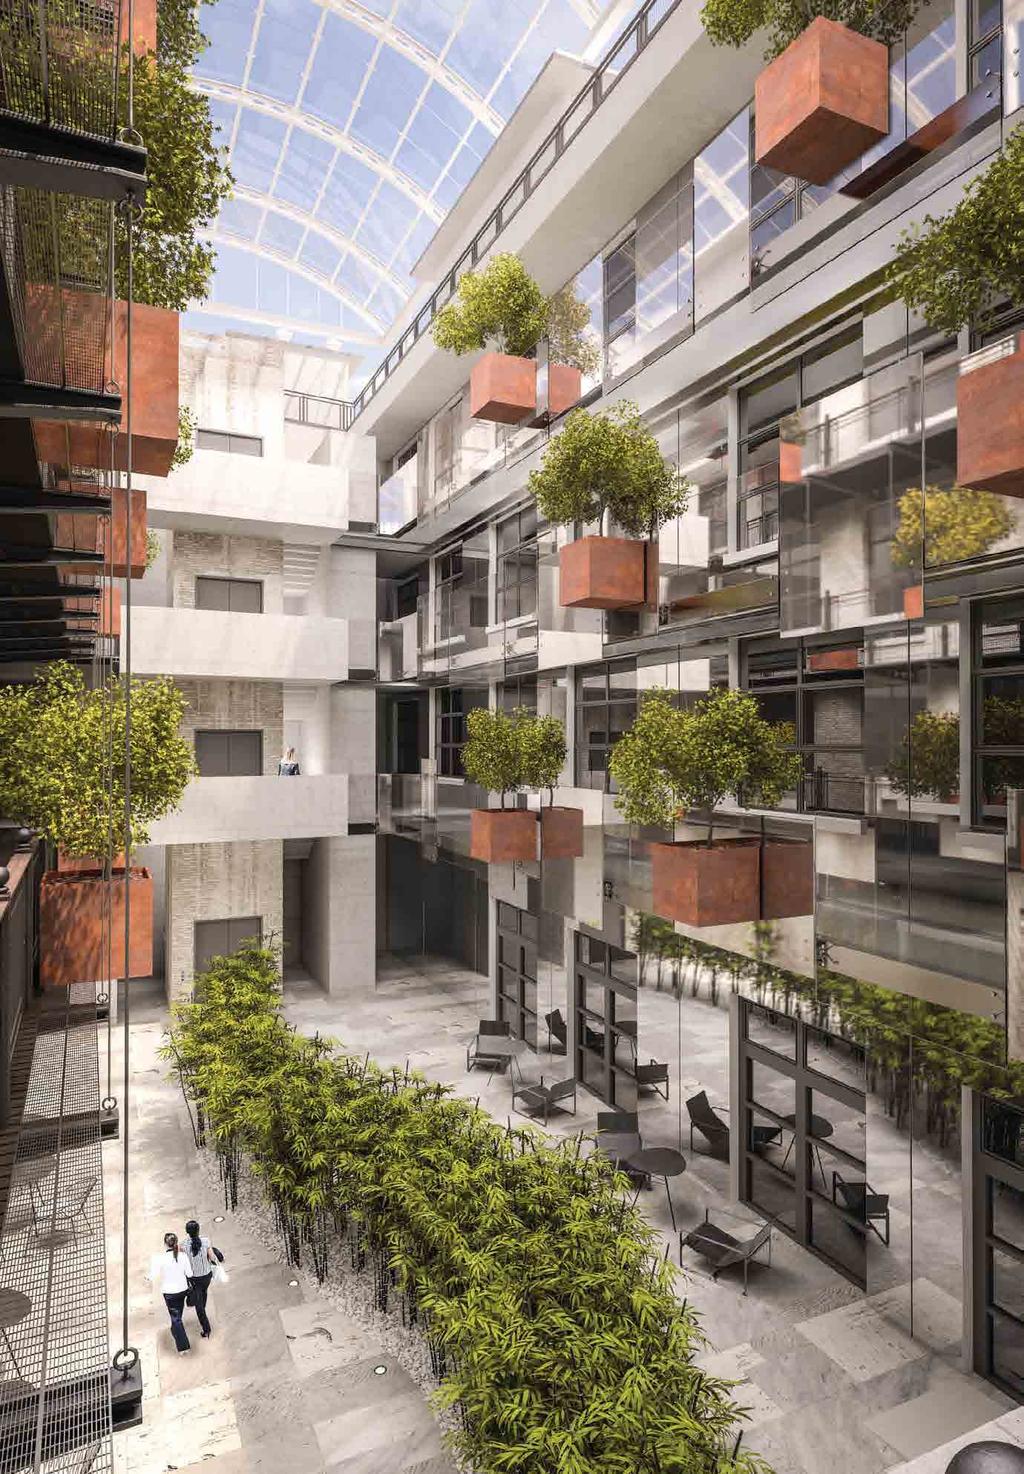 Conceptual space The imposing entrance foyer, atrium lightwell and apartment interiors have been designed and influenced by the award winning practice of Rabih Hage - whose accolades include the